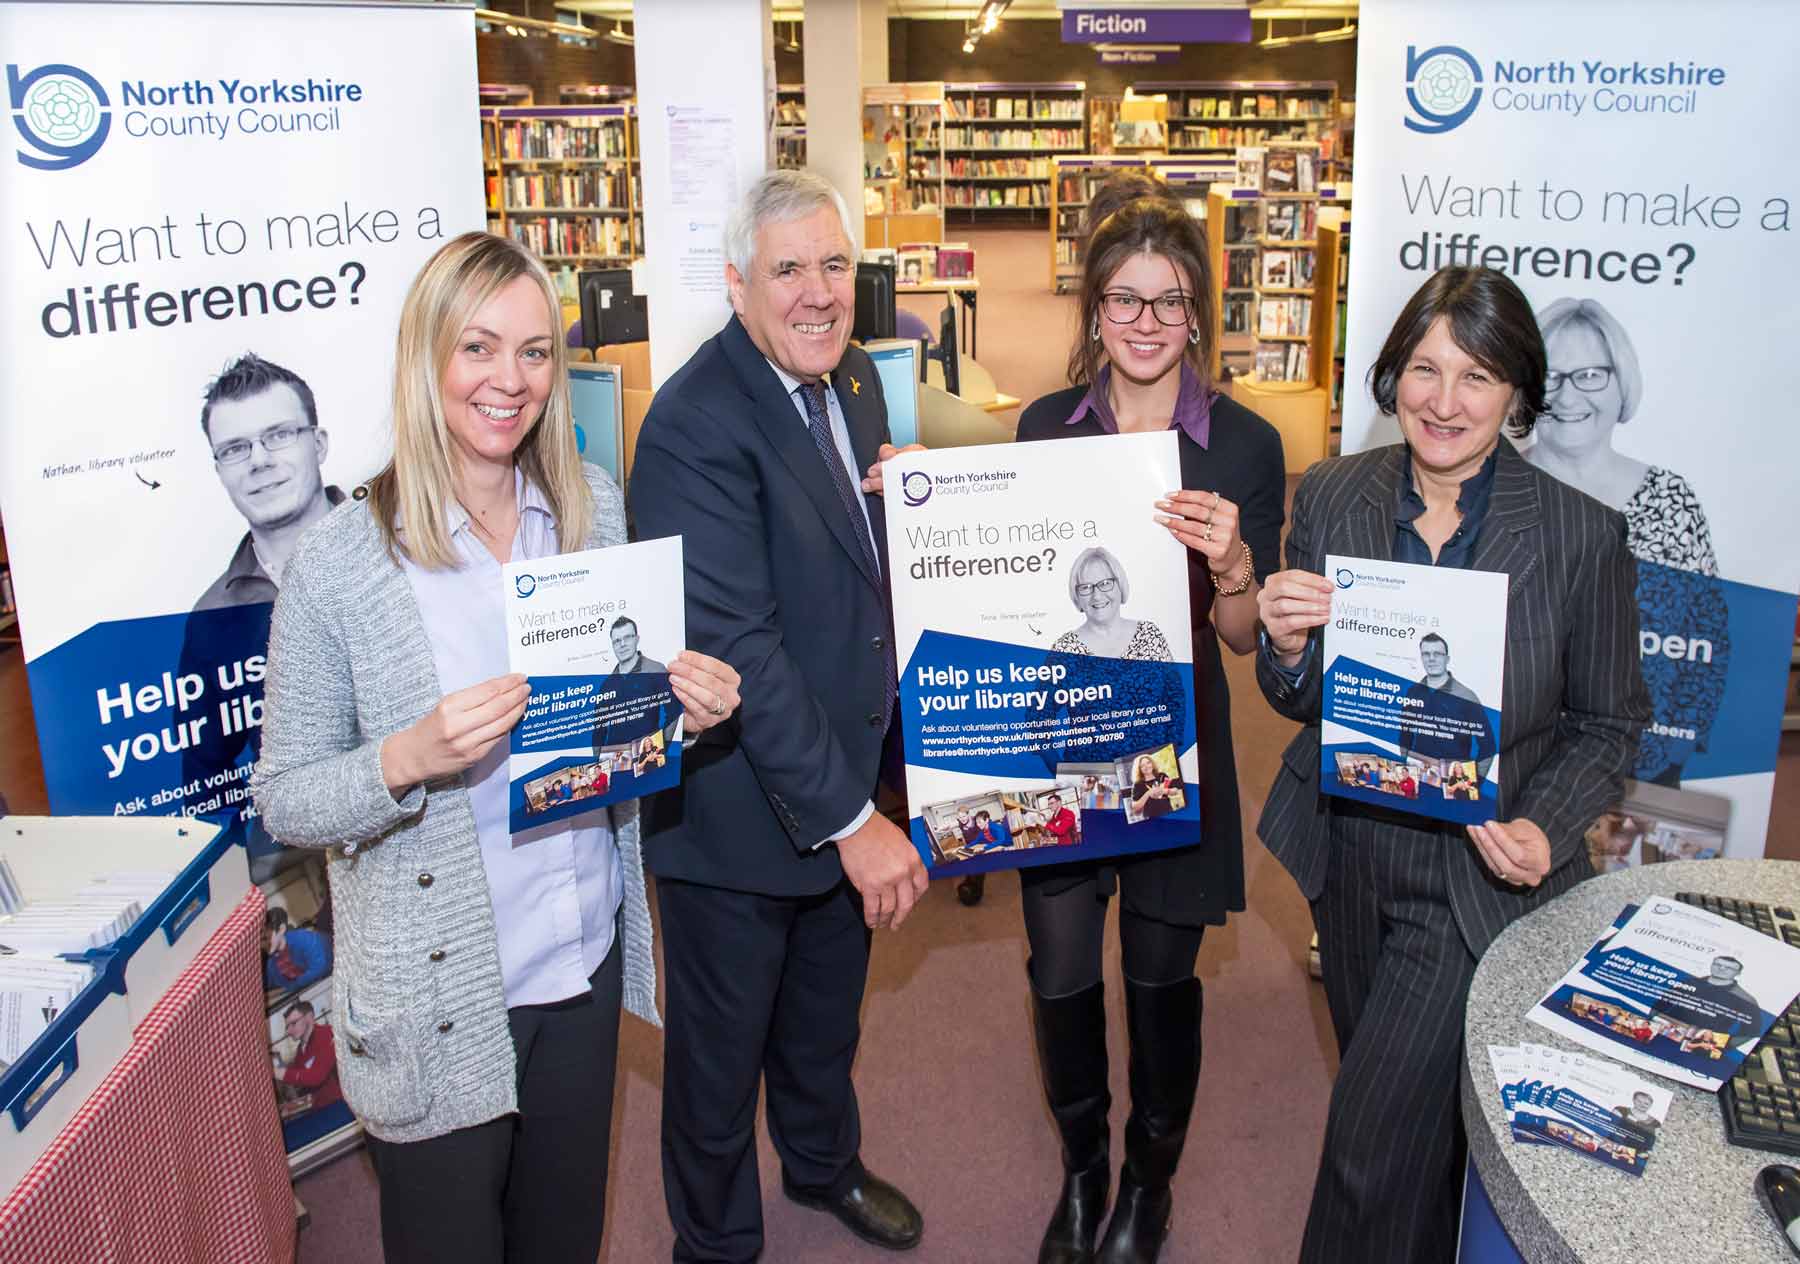 County Councillor Chris Metcalfe promotes the library volunteers campaign with, right, Julie Blaisdale, Assistant Director, Library and Community Services, and library team members Rachel Leahy, left, and Elivia Camilleri, second from right